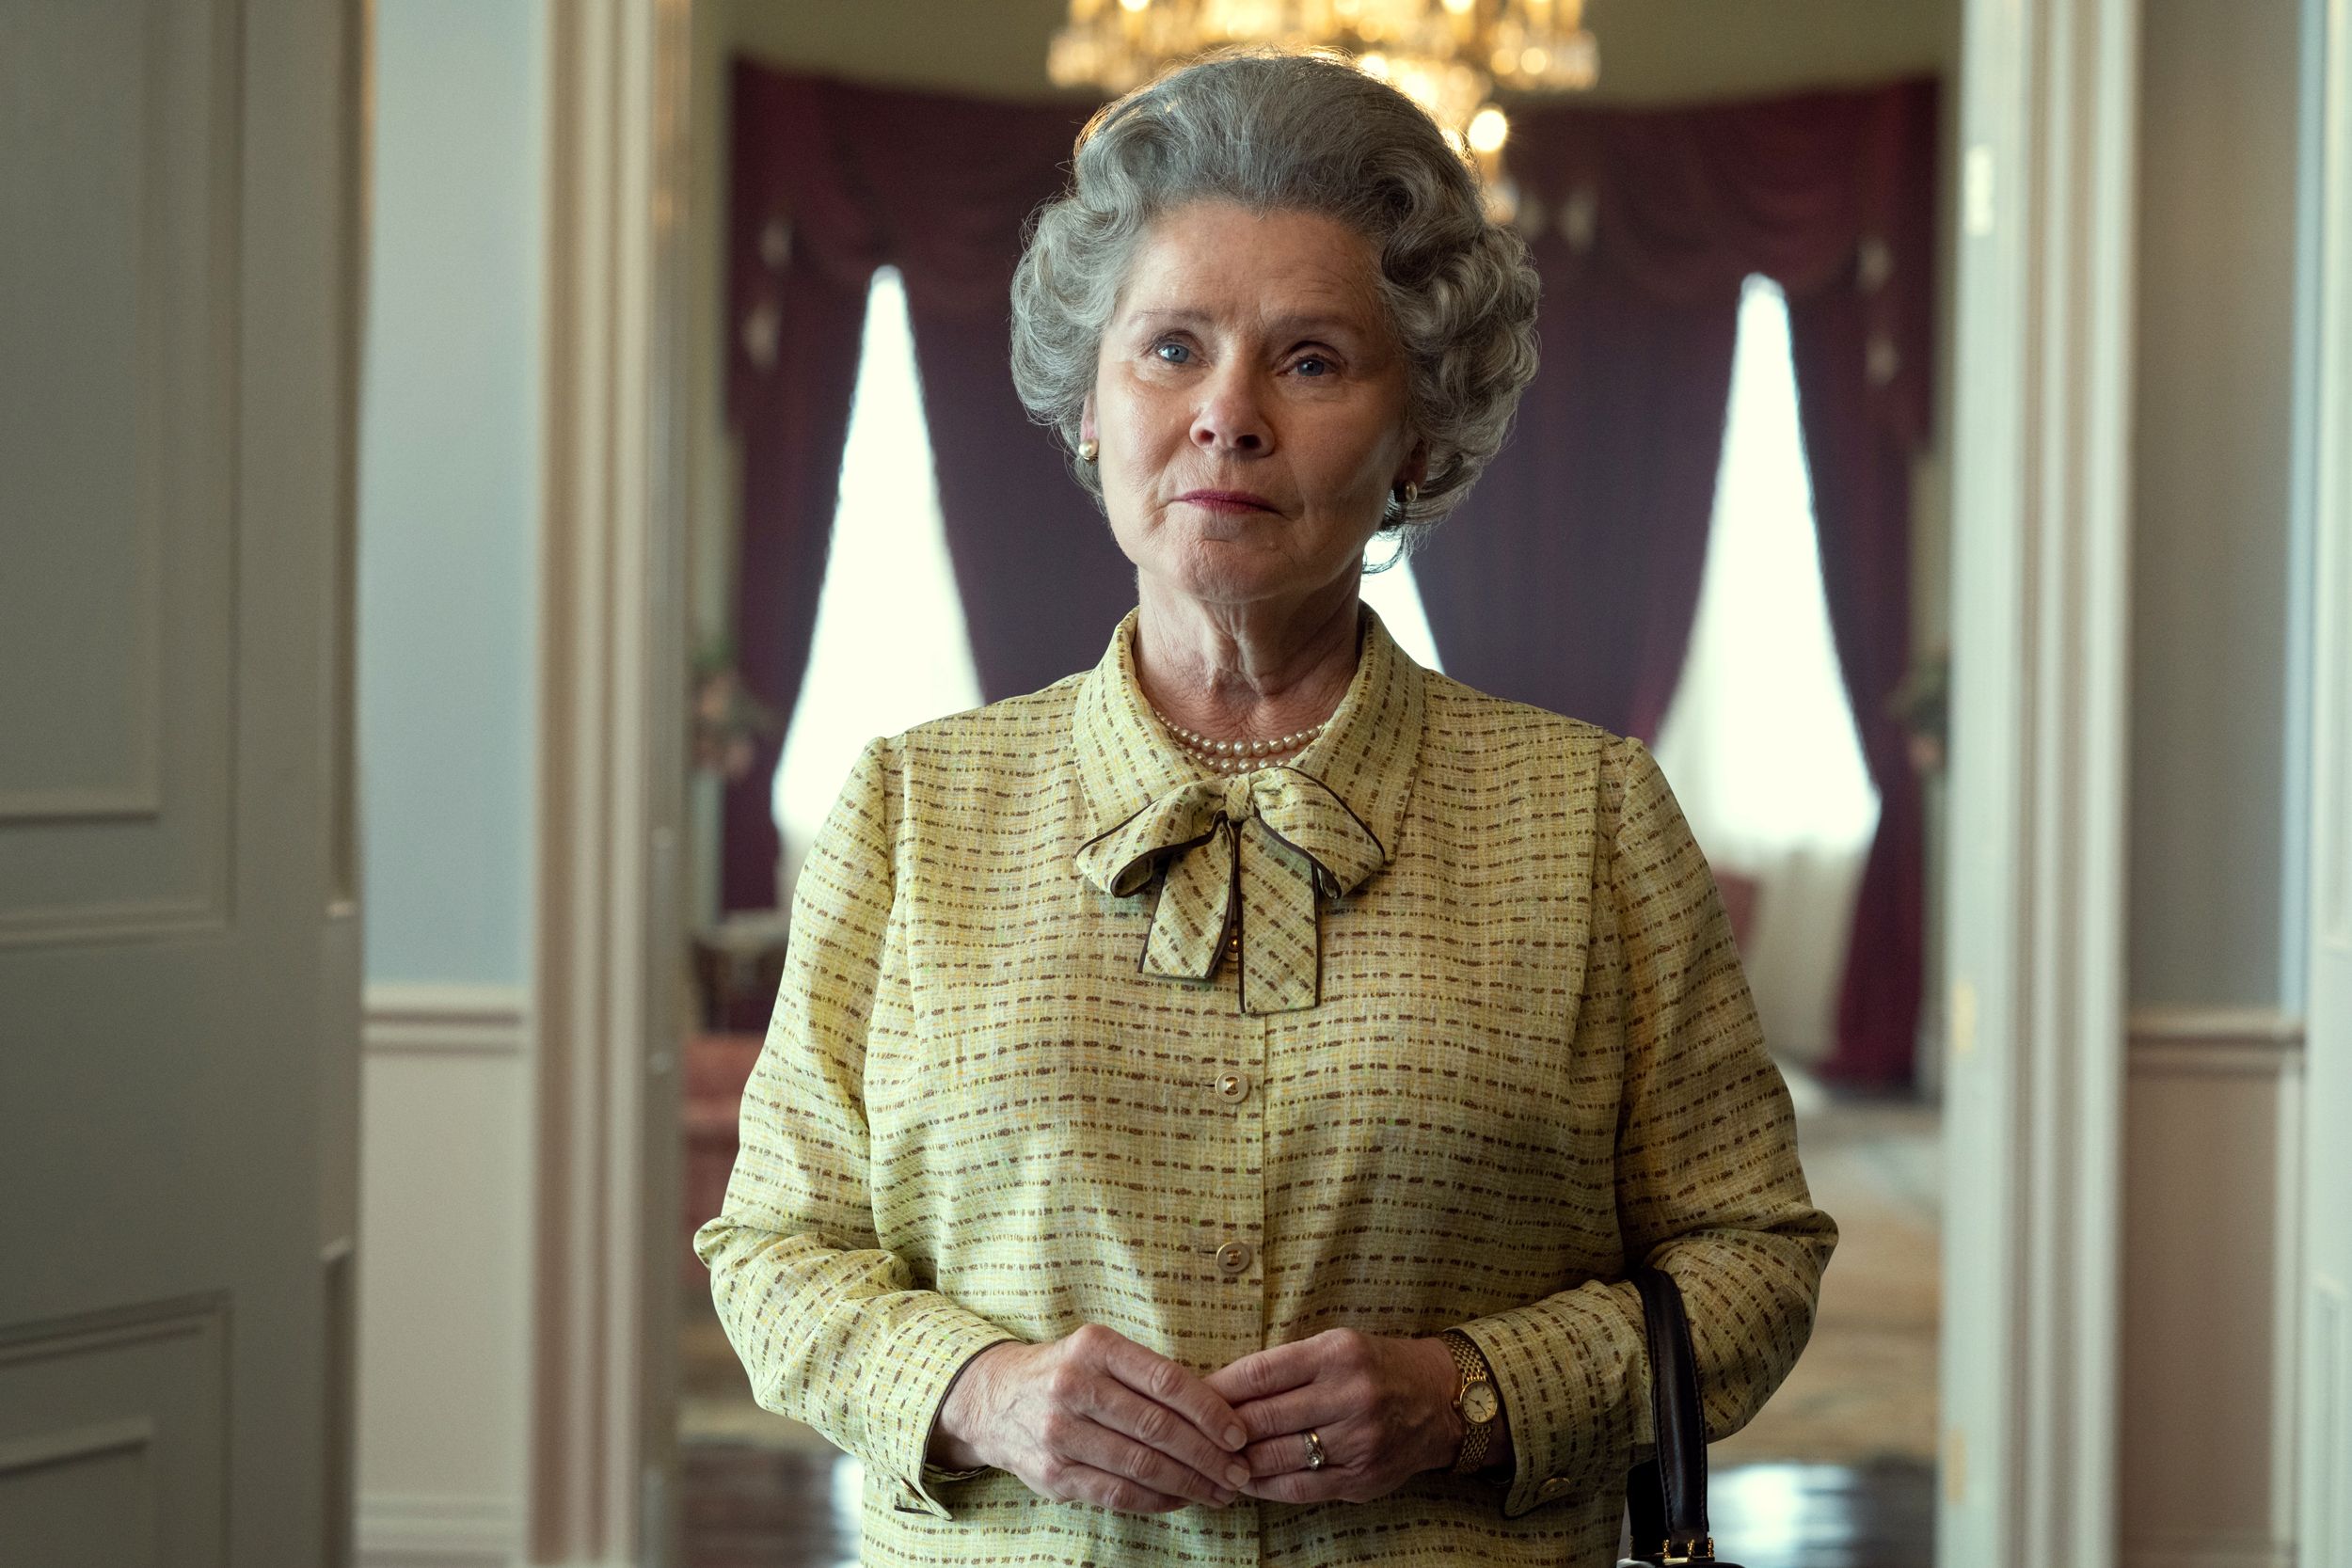 How to Watch or Stream 'The Crown' Online - Is The Crown on Netflix?